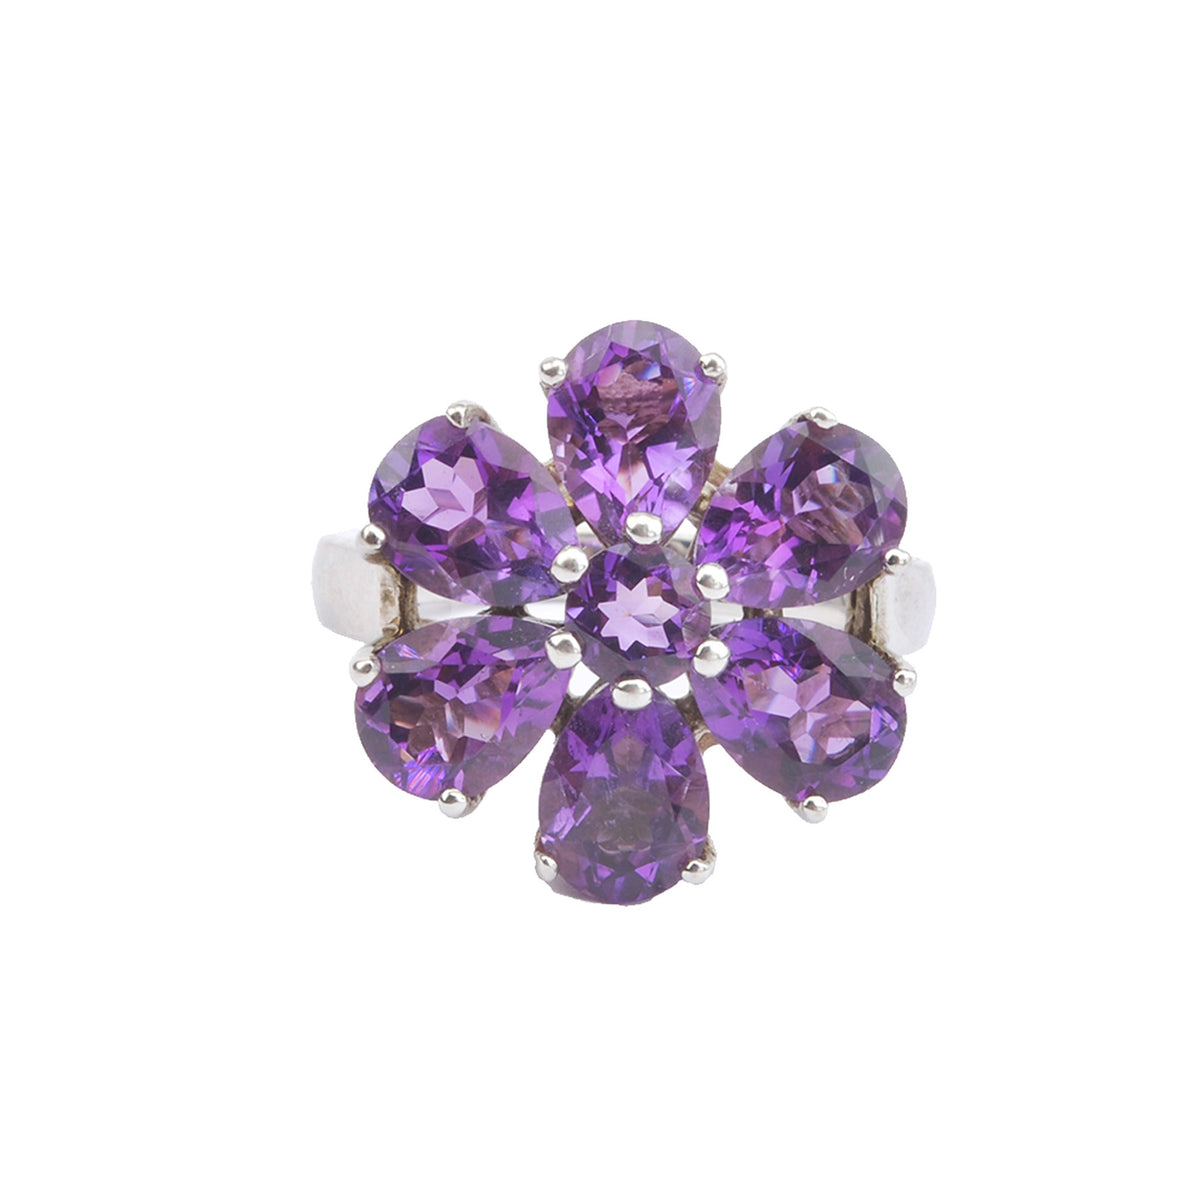 Big flower ring with amethysts, flower ring, flower amethyst ring, Silver Ring amethyst, silver ring, sterling silver amethyst ring, silver ring, topaz ring, sterling silver ring, amethyst ring, flower ring, stylish ring, chic ring, fashionable ring